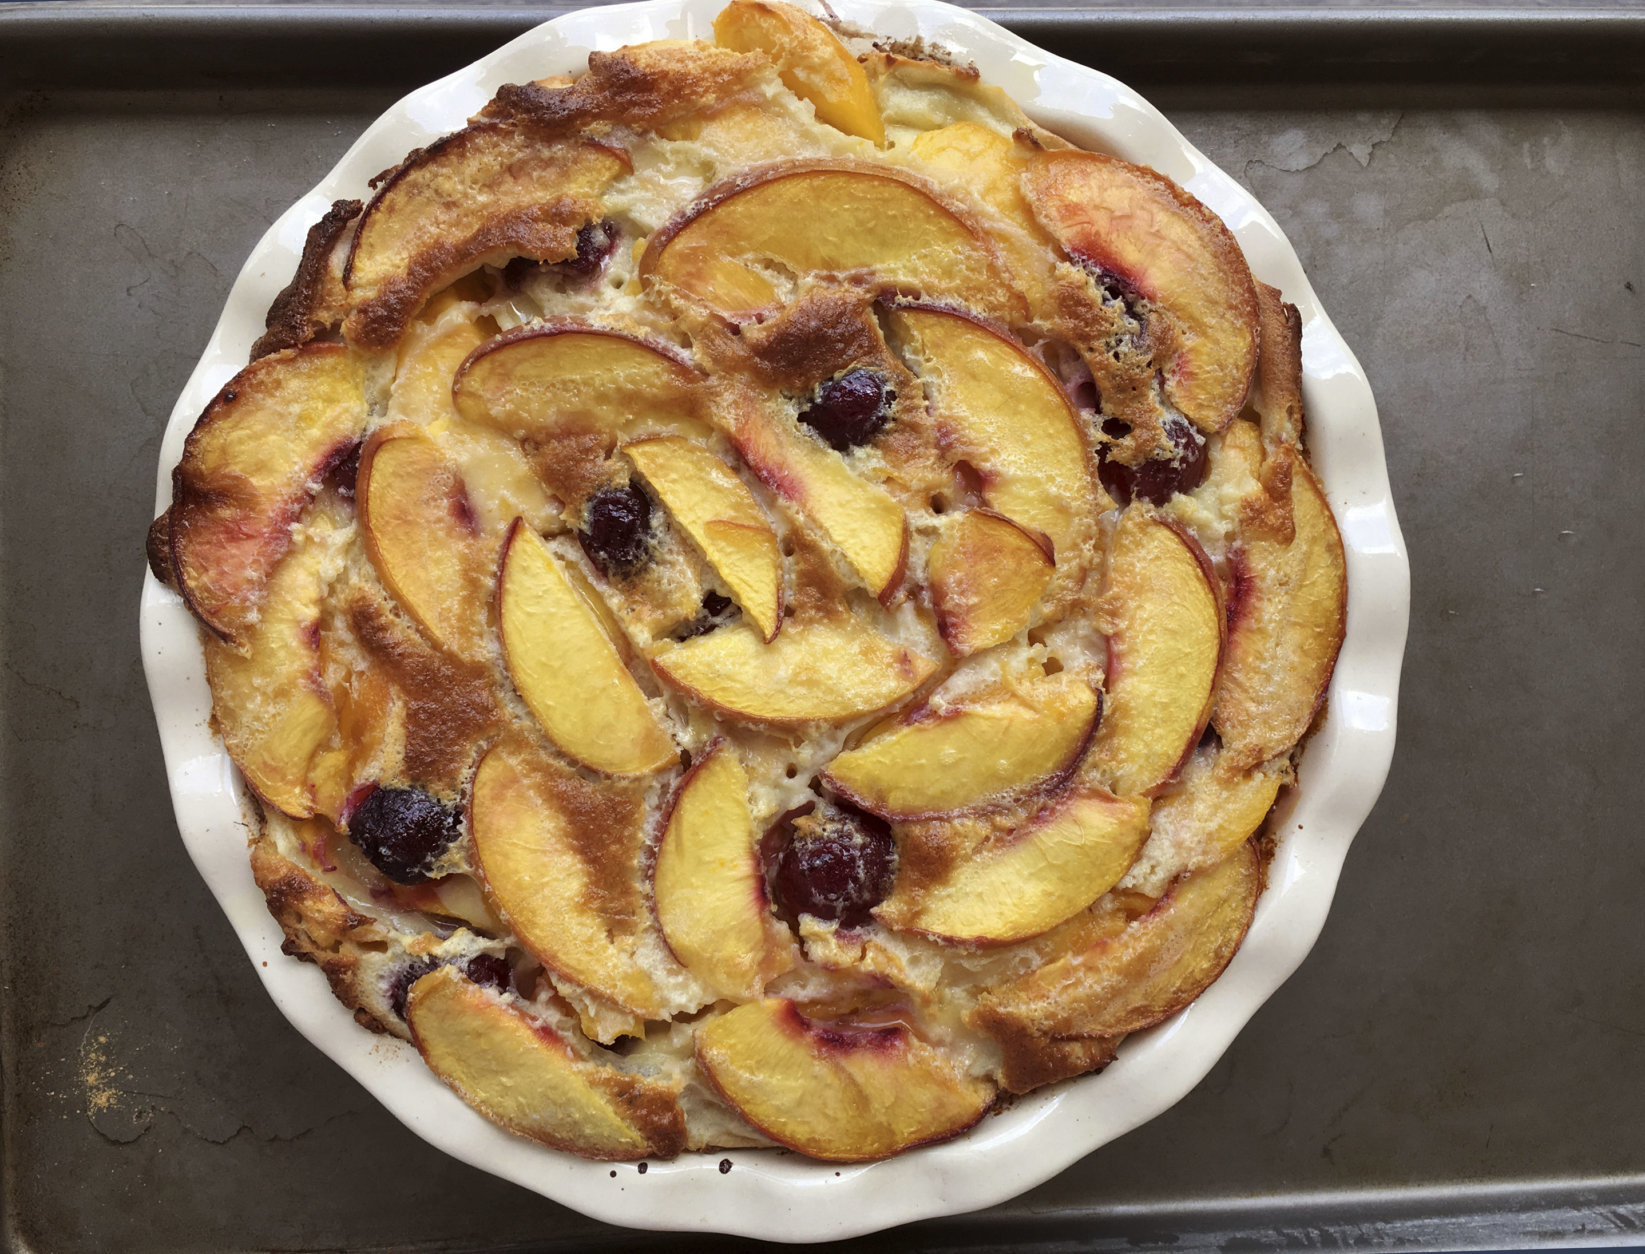 This July 22, 2017 photo shows a summer peach clafoutis in Houston, Texas. This dish is from a recipe by Elizabeth Karmel. The recipe that can be tailored to whatever summer fruit is on hand, and not just cherries, which are traditionally used in France for this rustic dessert that envelopes the fruit in a custardy crepe-like batter. (Elizabeth Karmel via AP)